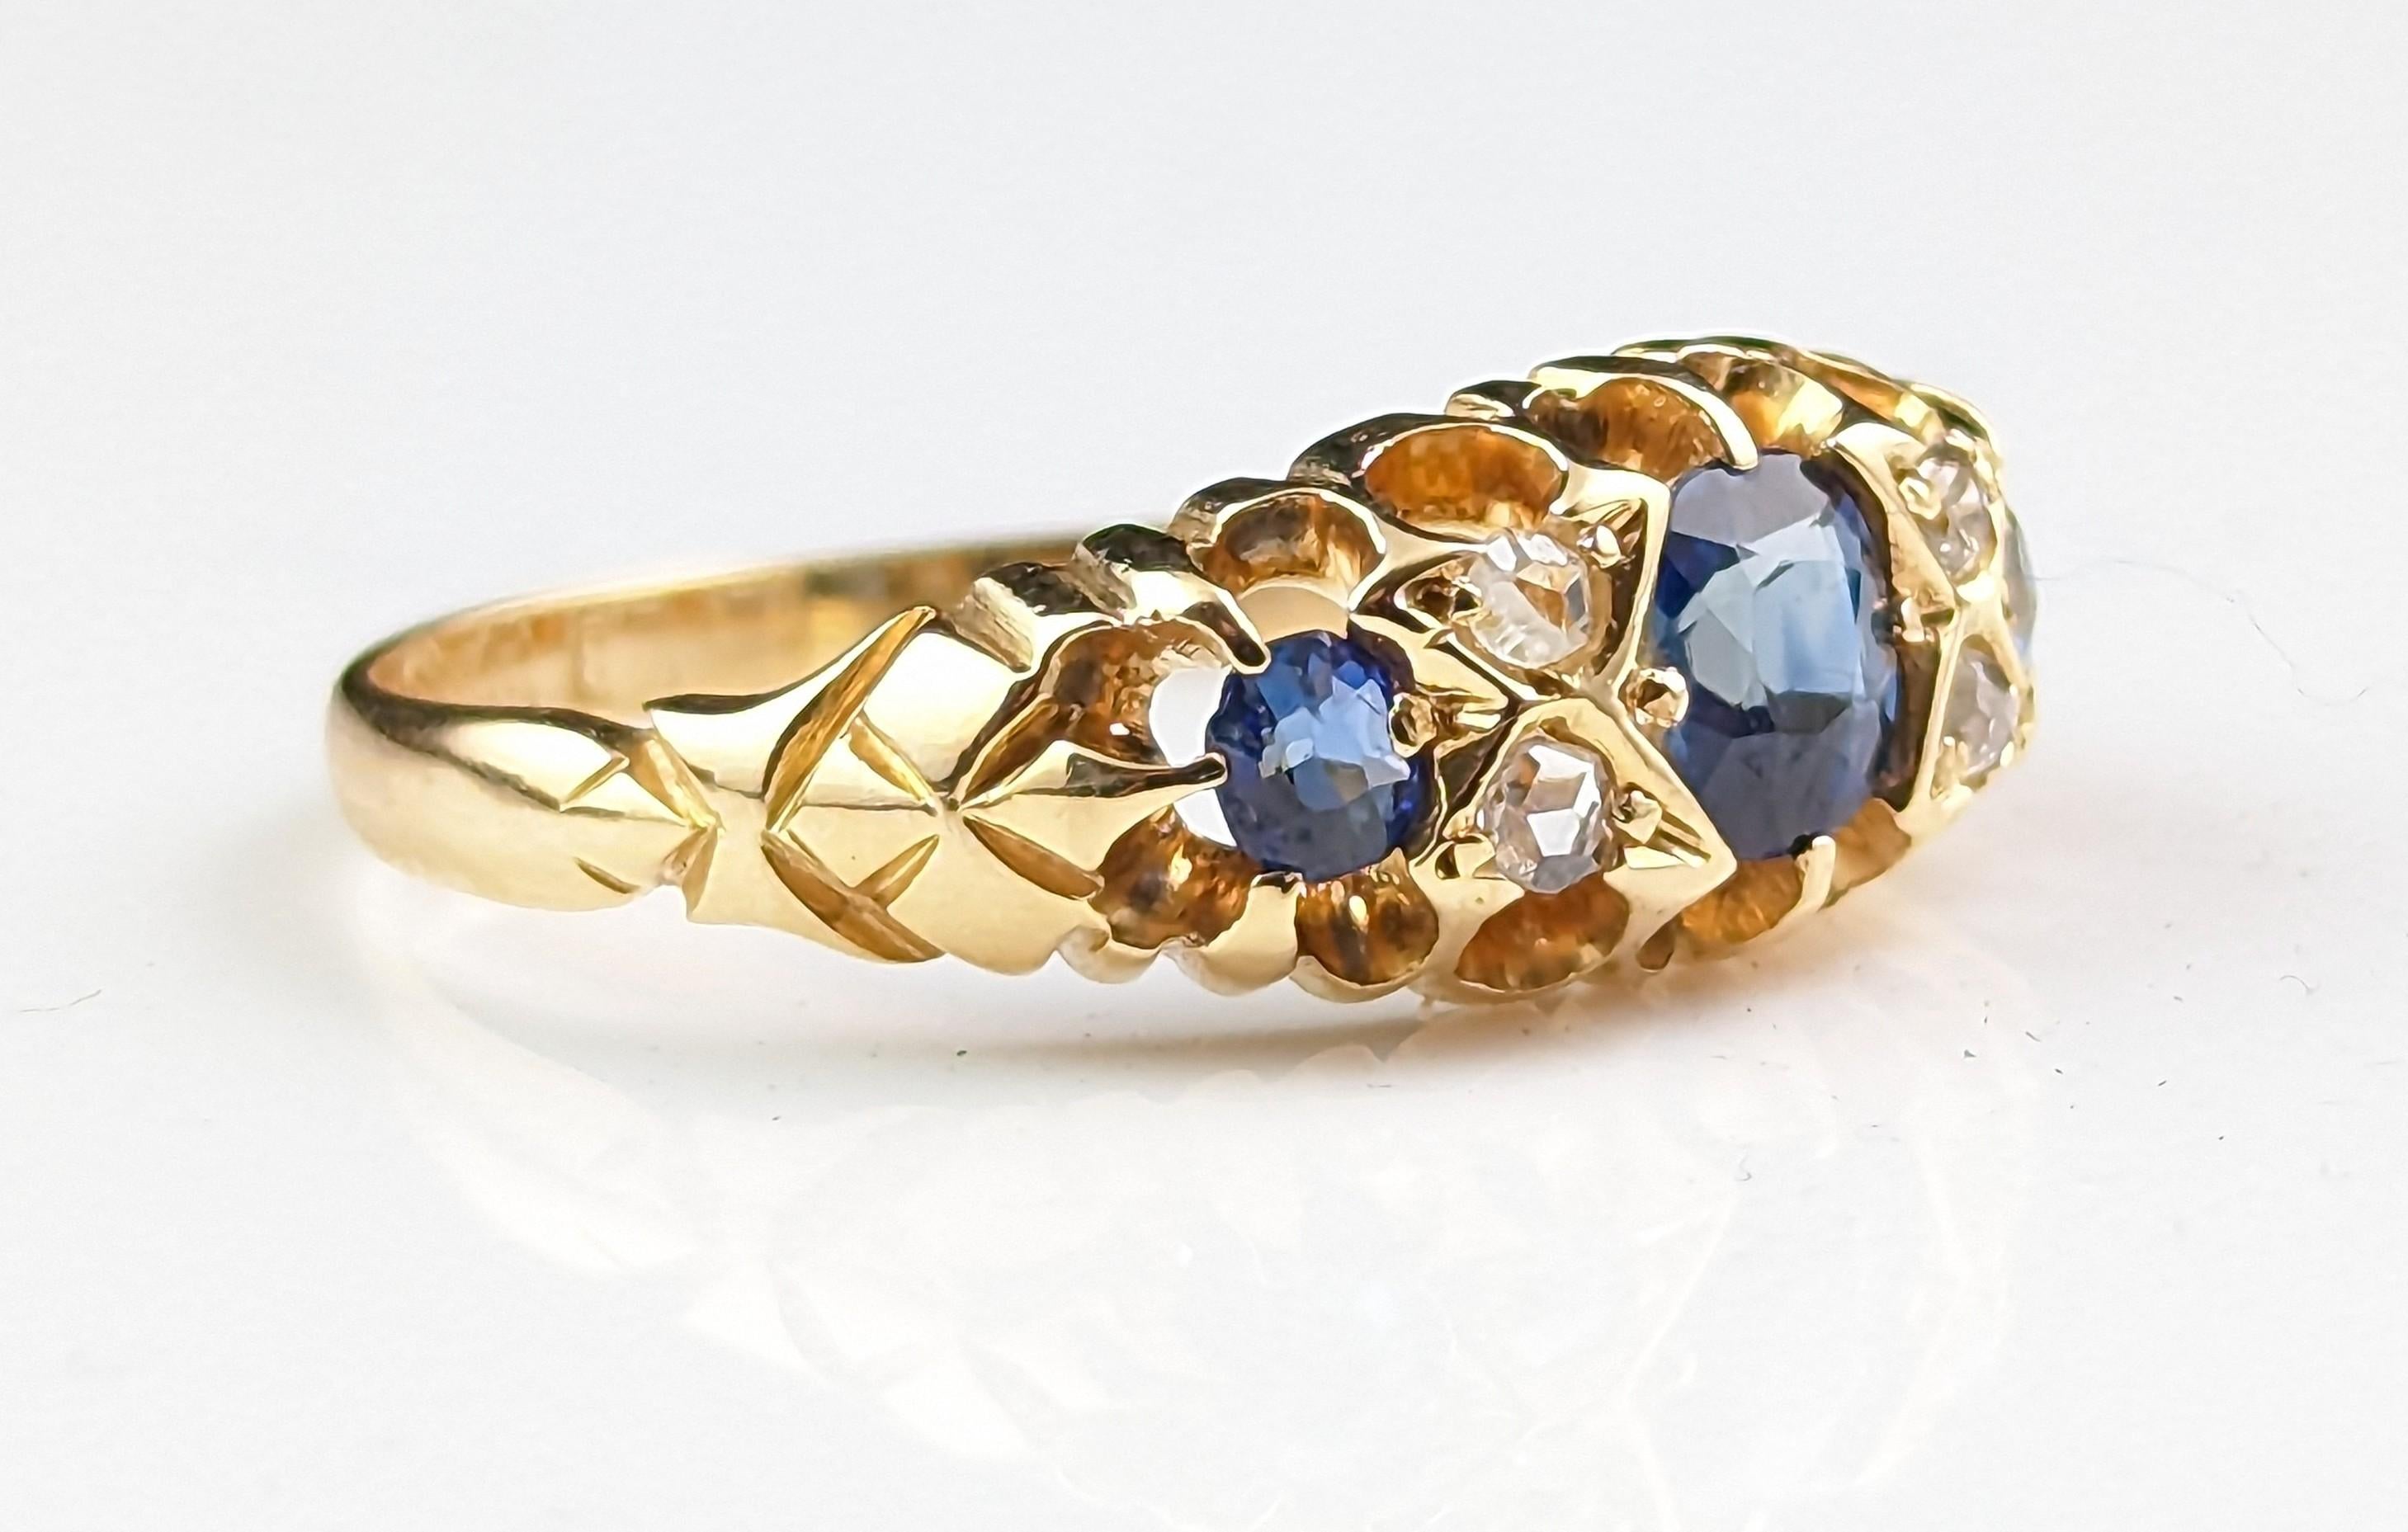 Antique Sapphire and Diamond Ring, 18k Yellow Gold, Victorian 2